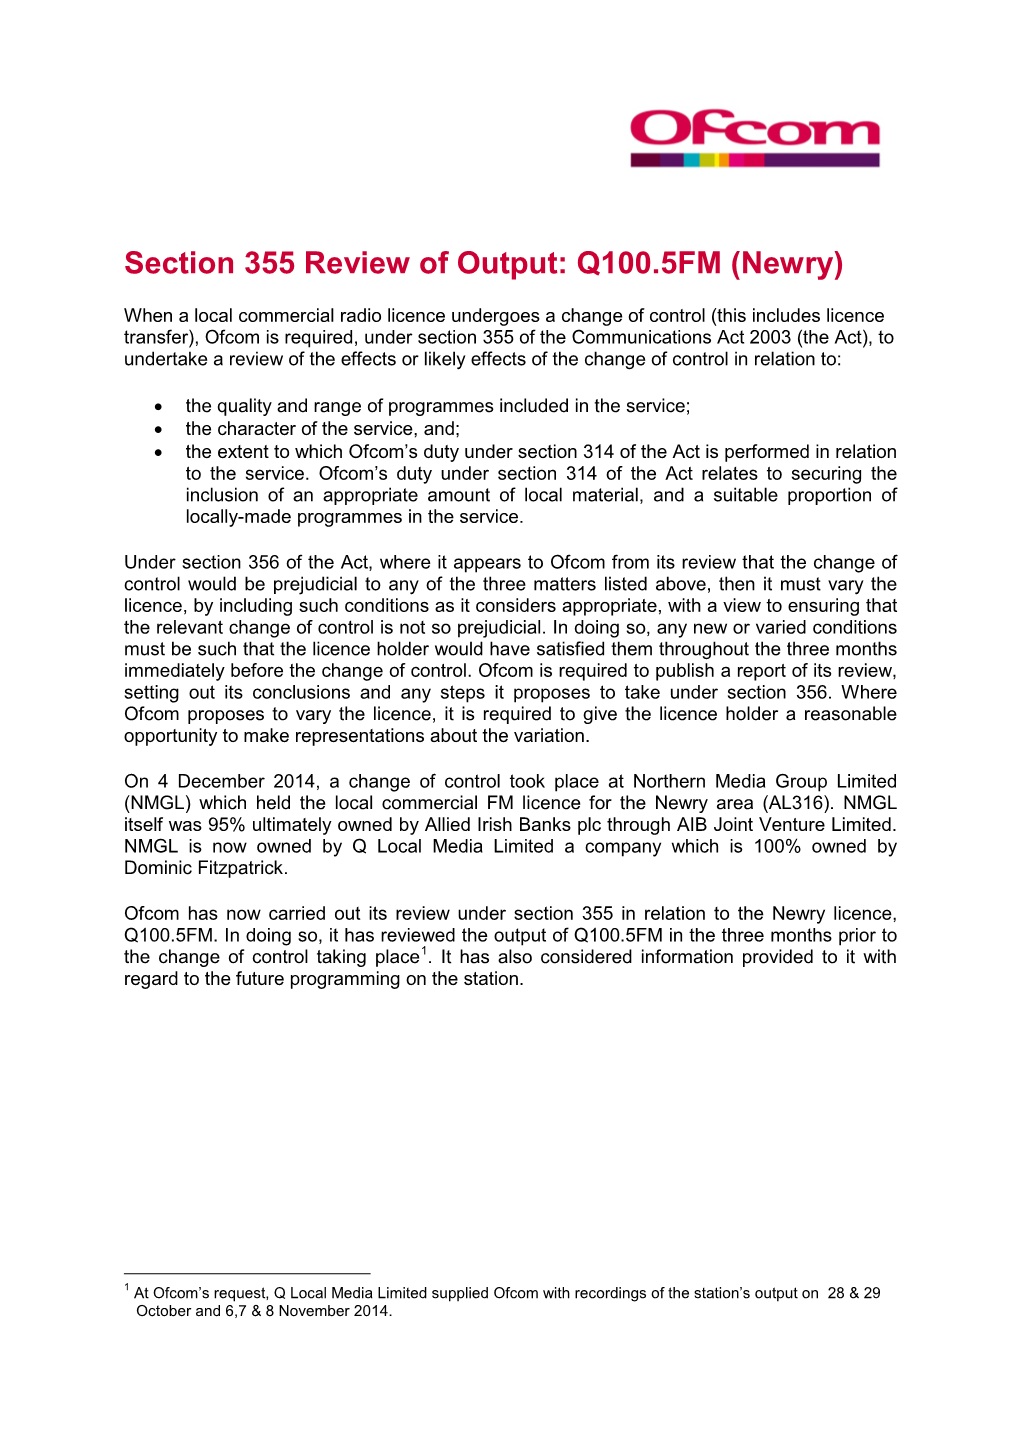 Section 355 Review of Output: Q100.5FM (Newry)